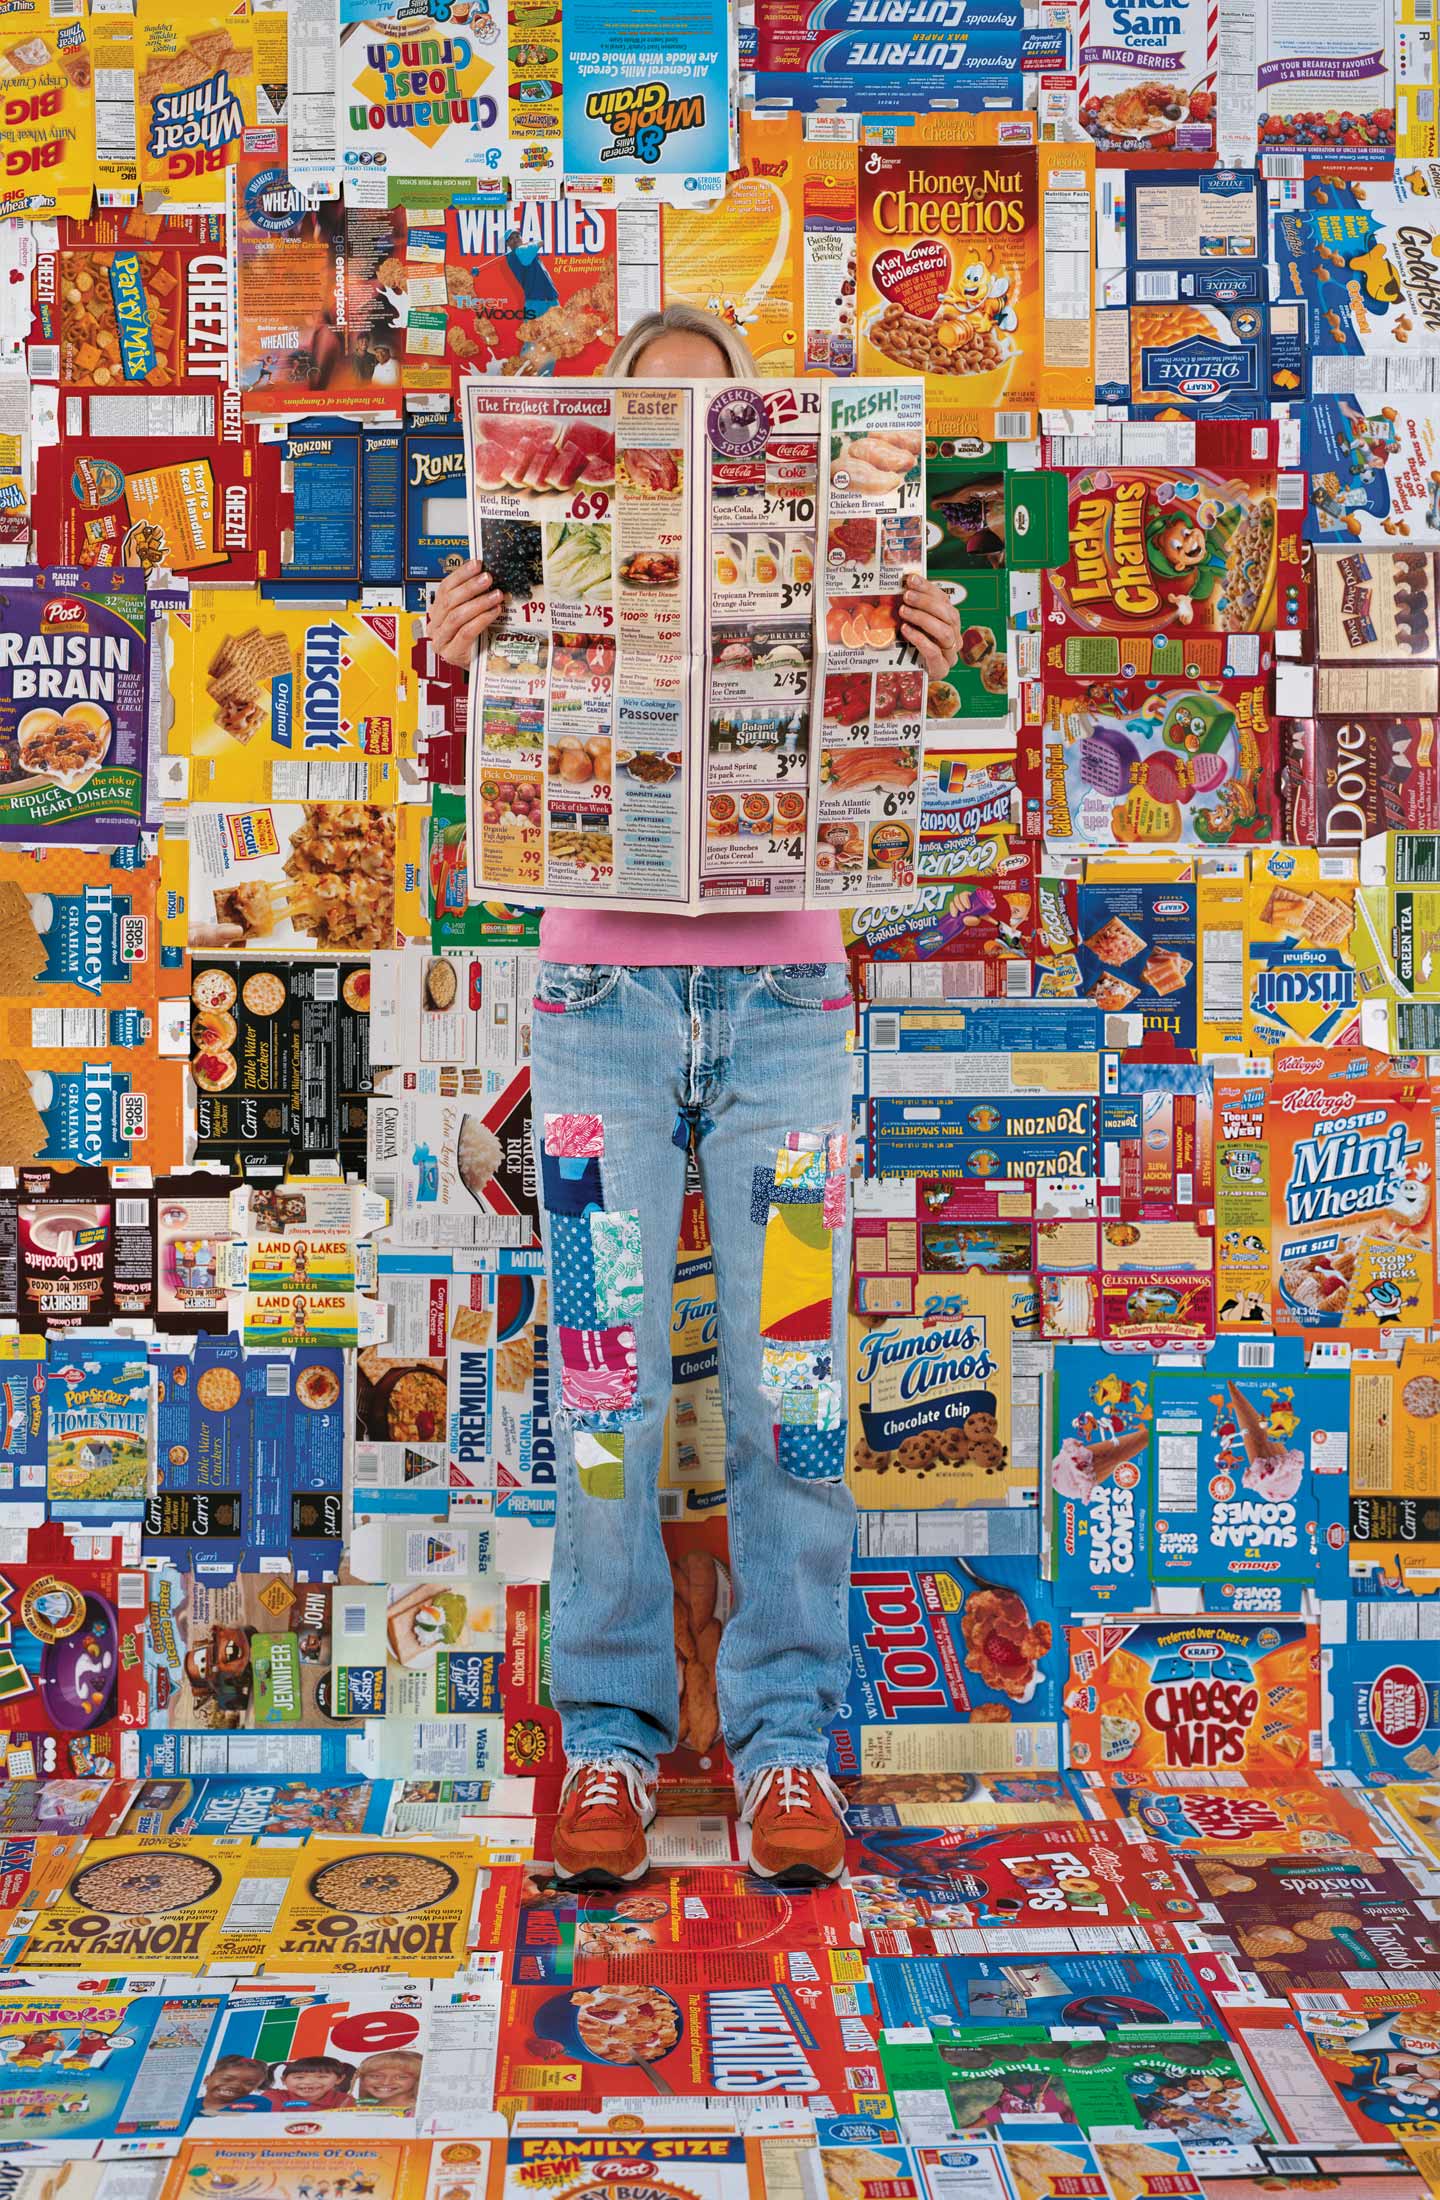 Lost in My Life (Boxes), 2009. Archival pigment print. © Rachel Perry. Courtesy of the artist and Yancey Richardson Gallery. 